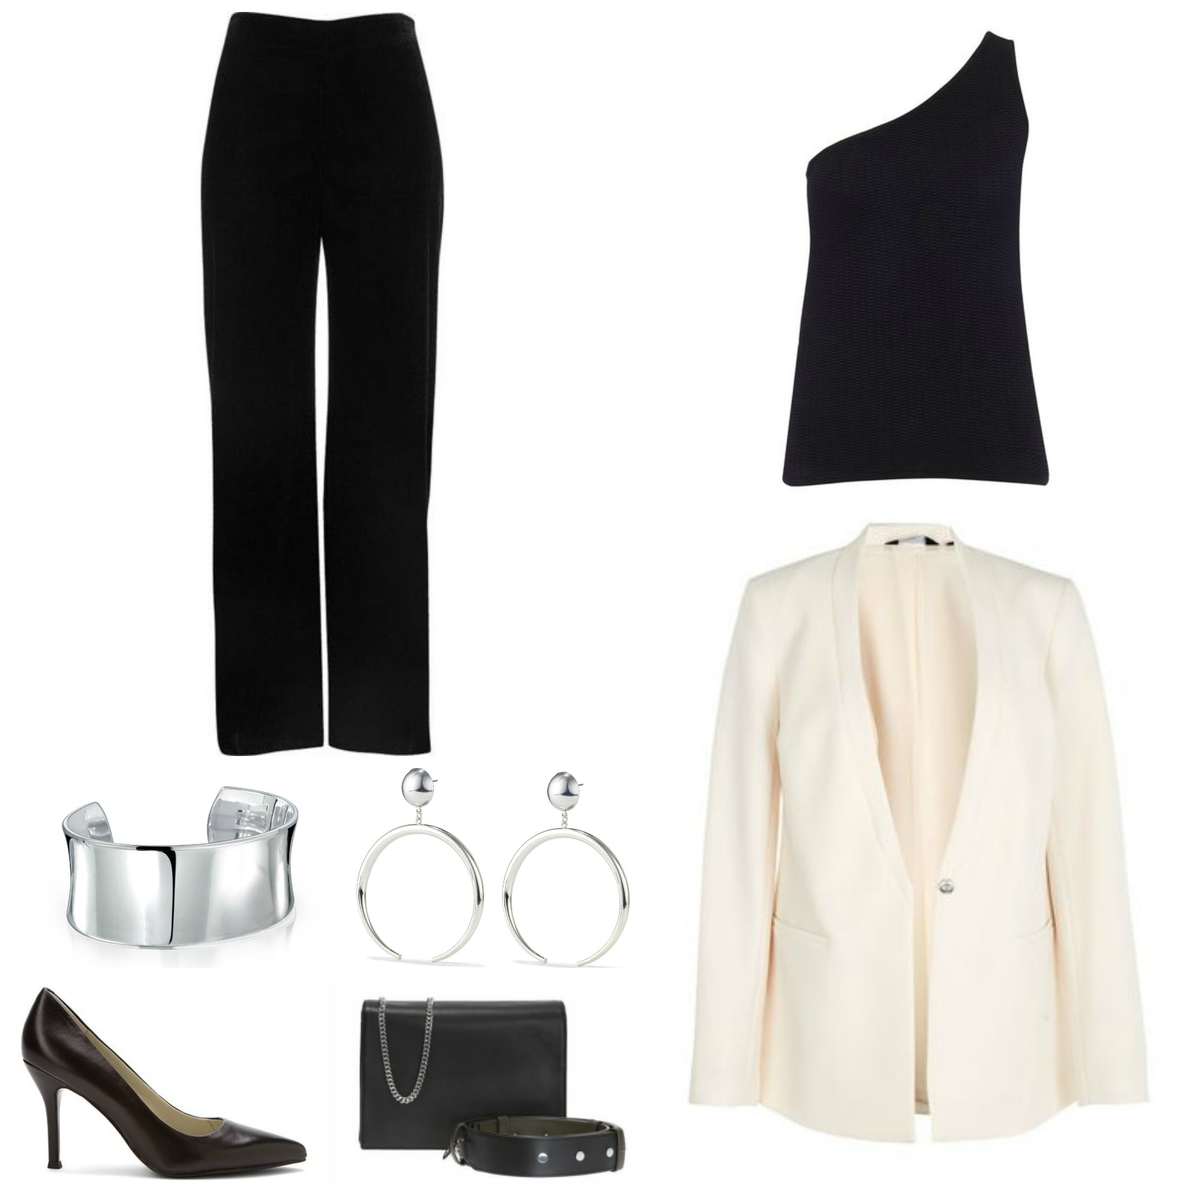 Image is of a cream blazer, black one-shouldered sweater, black pants, silver cuff bracelet and statement earrings, black pumps, and black handbag.